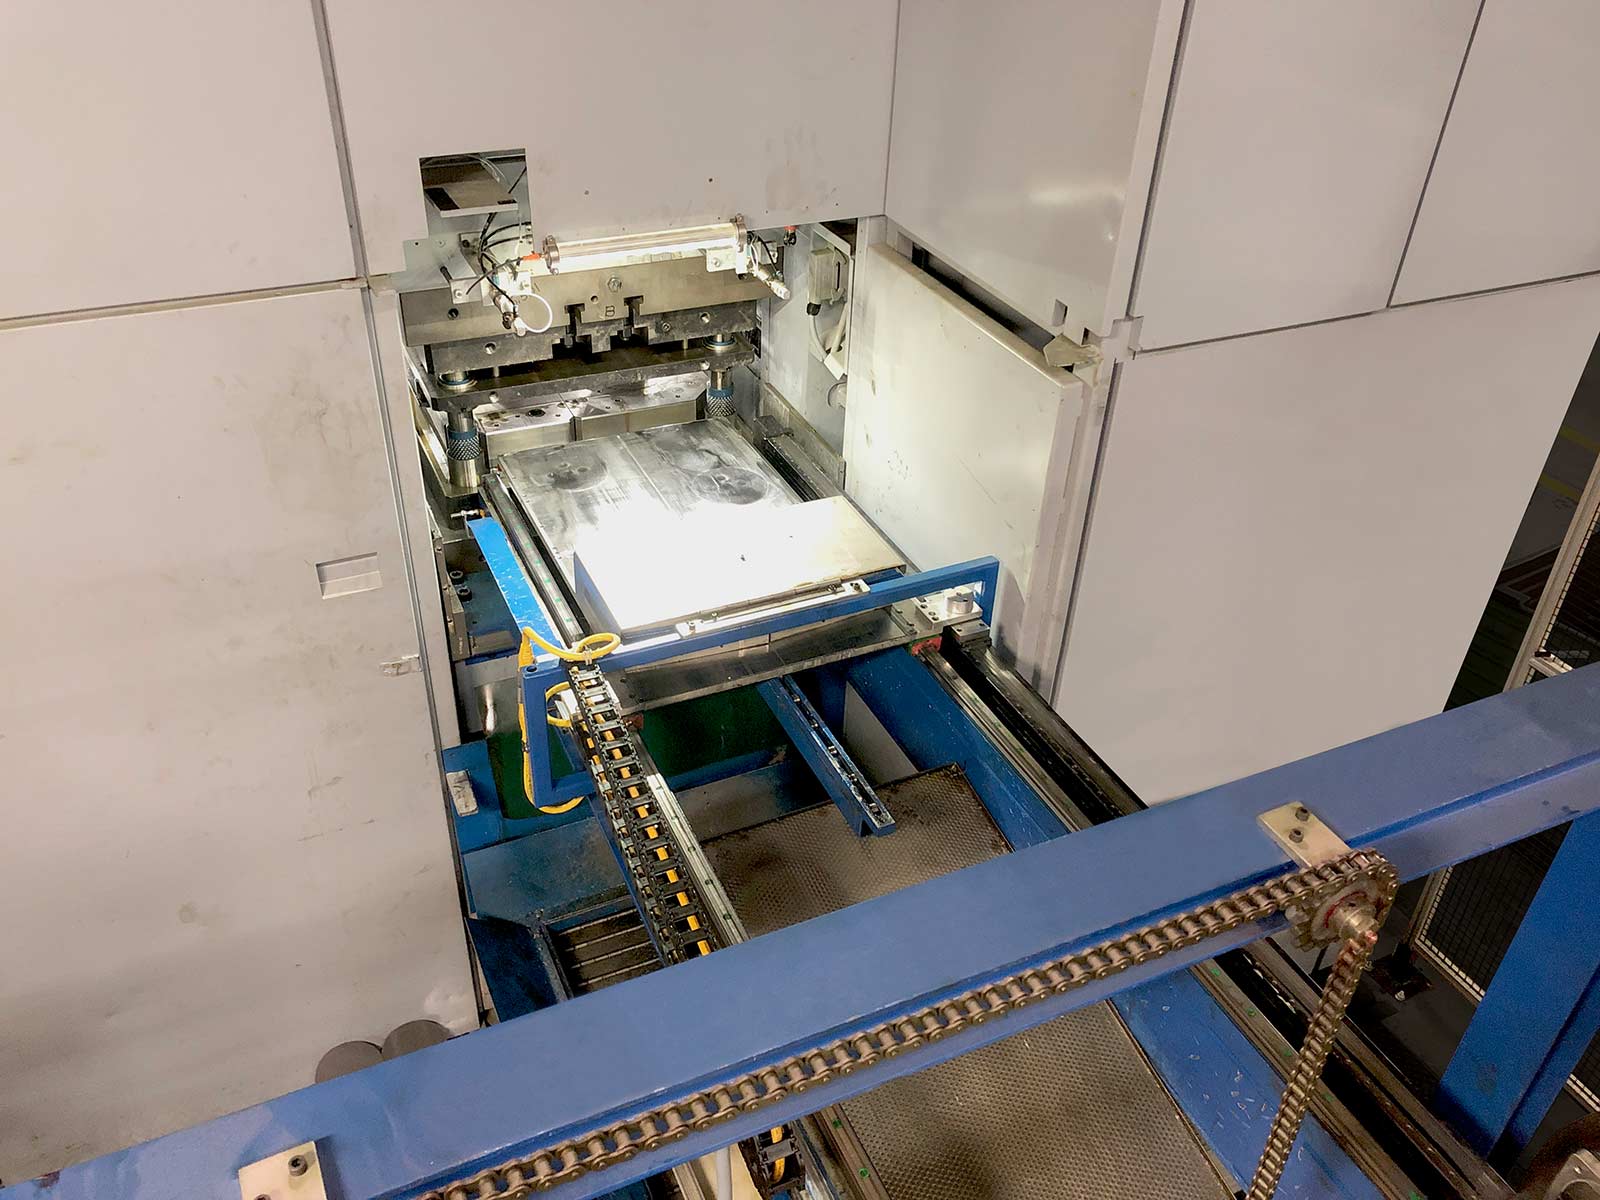 Parts Retrieval System Mounted to Press